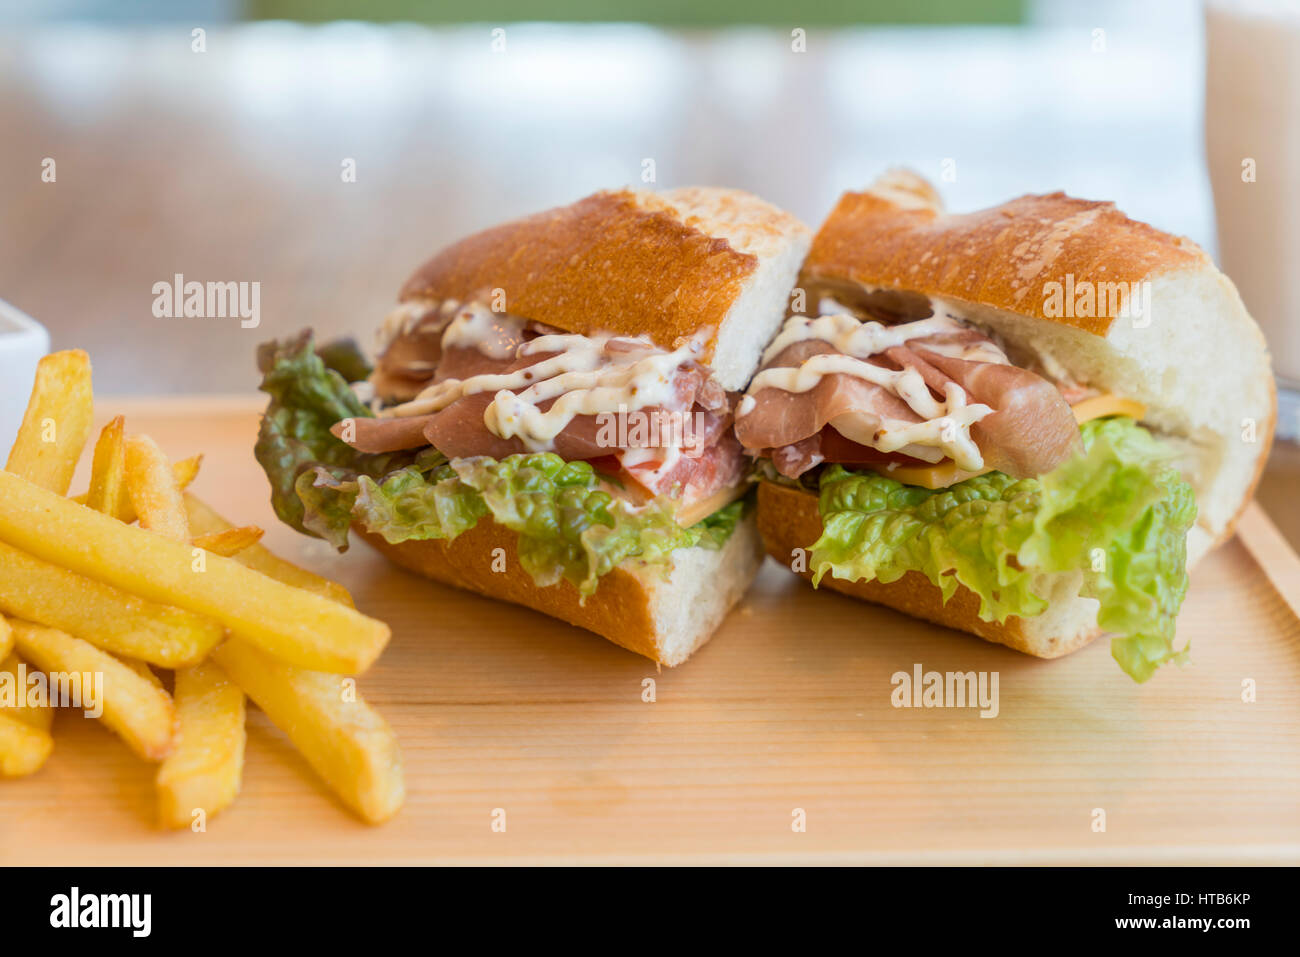 big sandwich with ham, cheese, vegetables and French fries Stock Photo